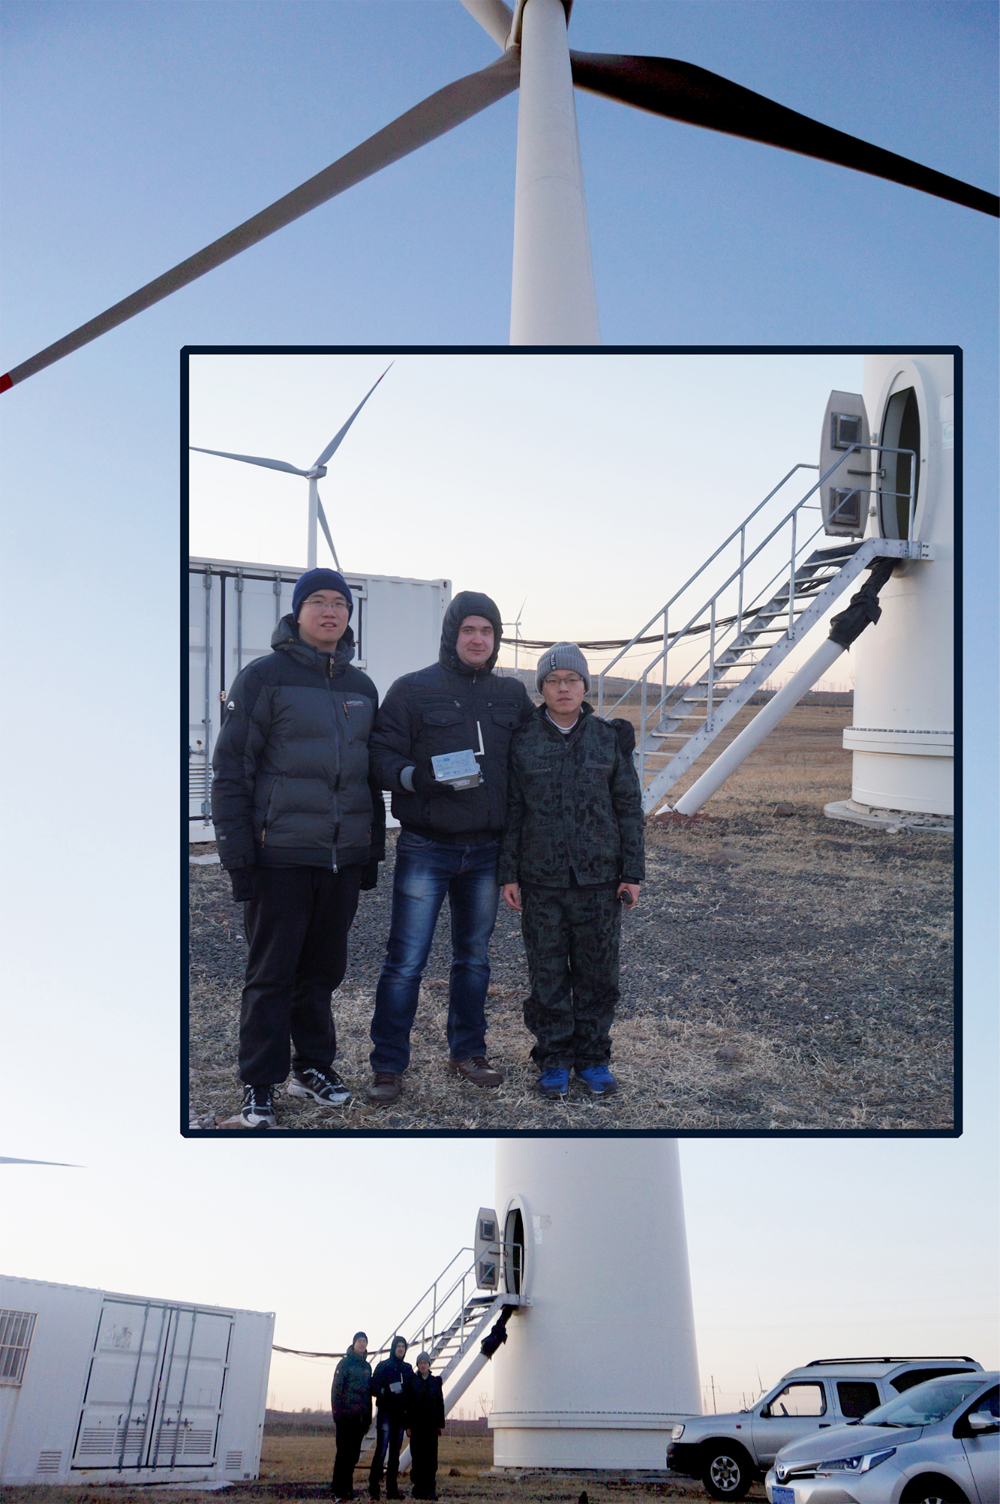 Siarhei Vasiukevich with Smartbow colleagues near the wind turbine where VibroBox system was tested